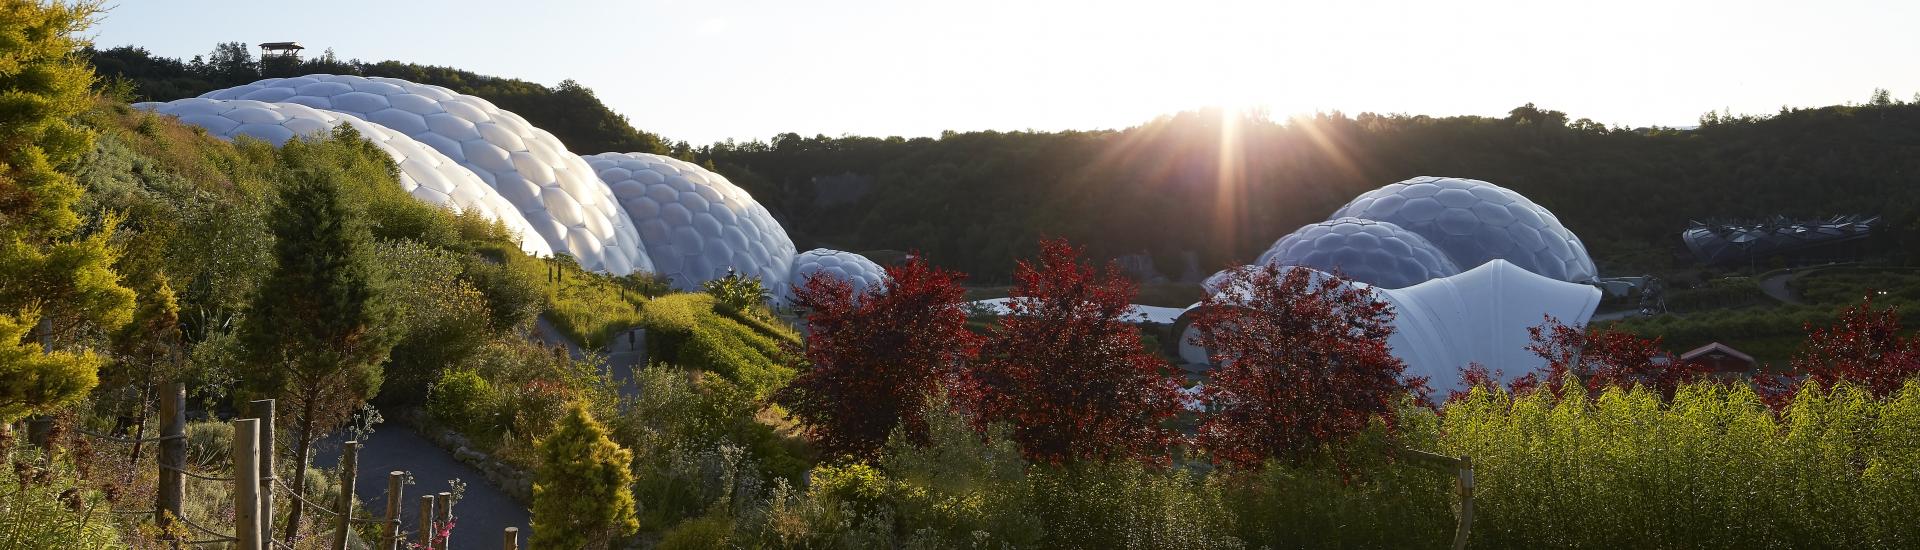 Early morning sun rising up over Eden Project Biomes